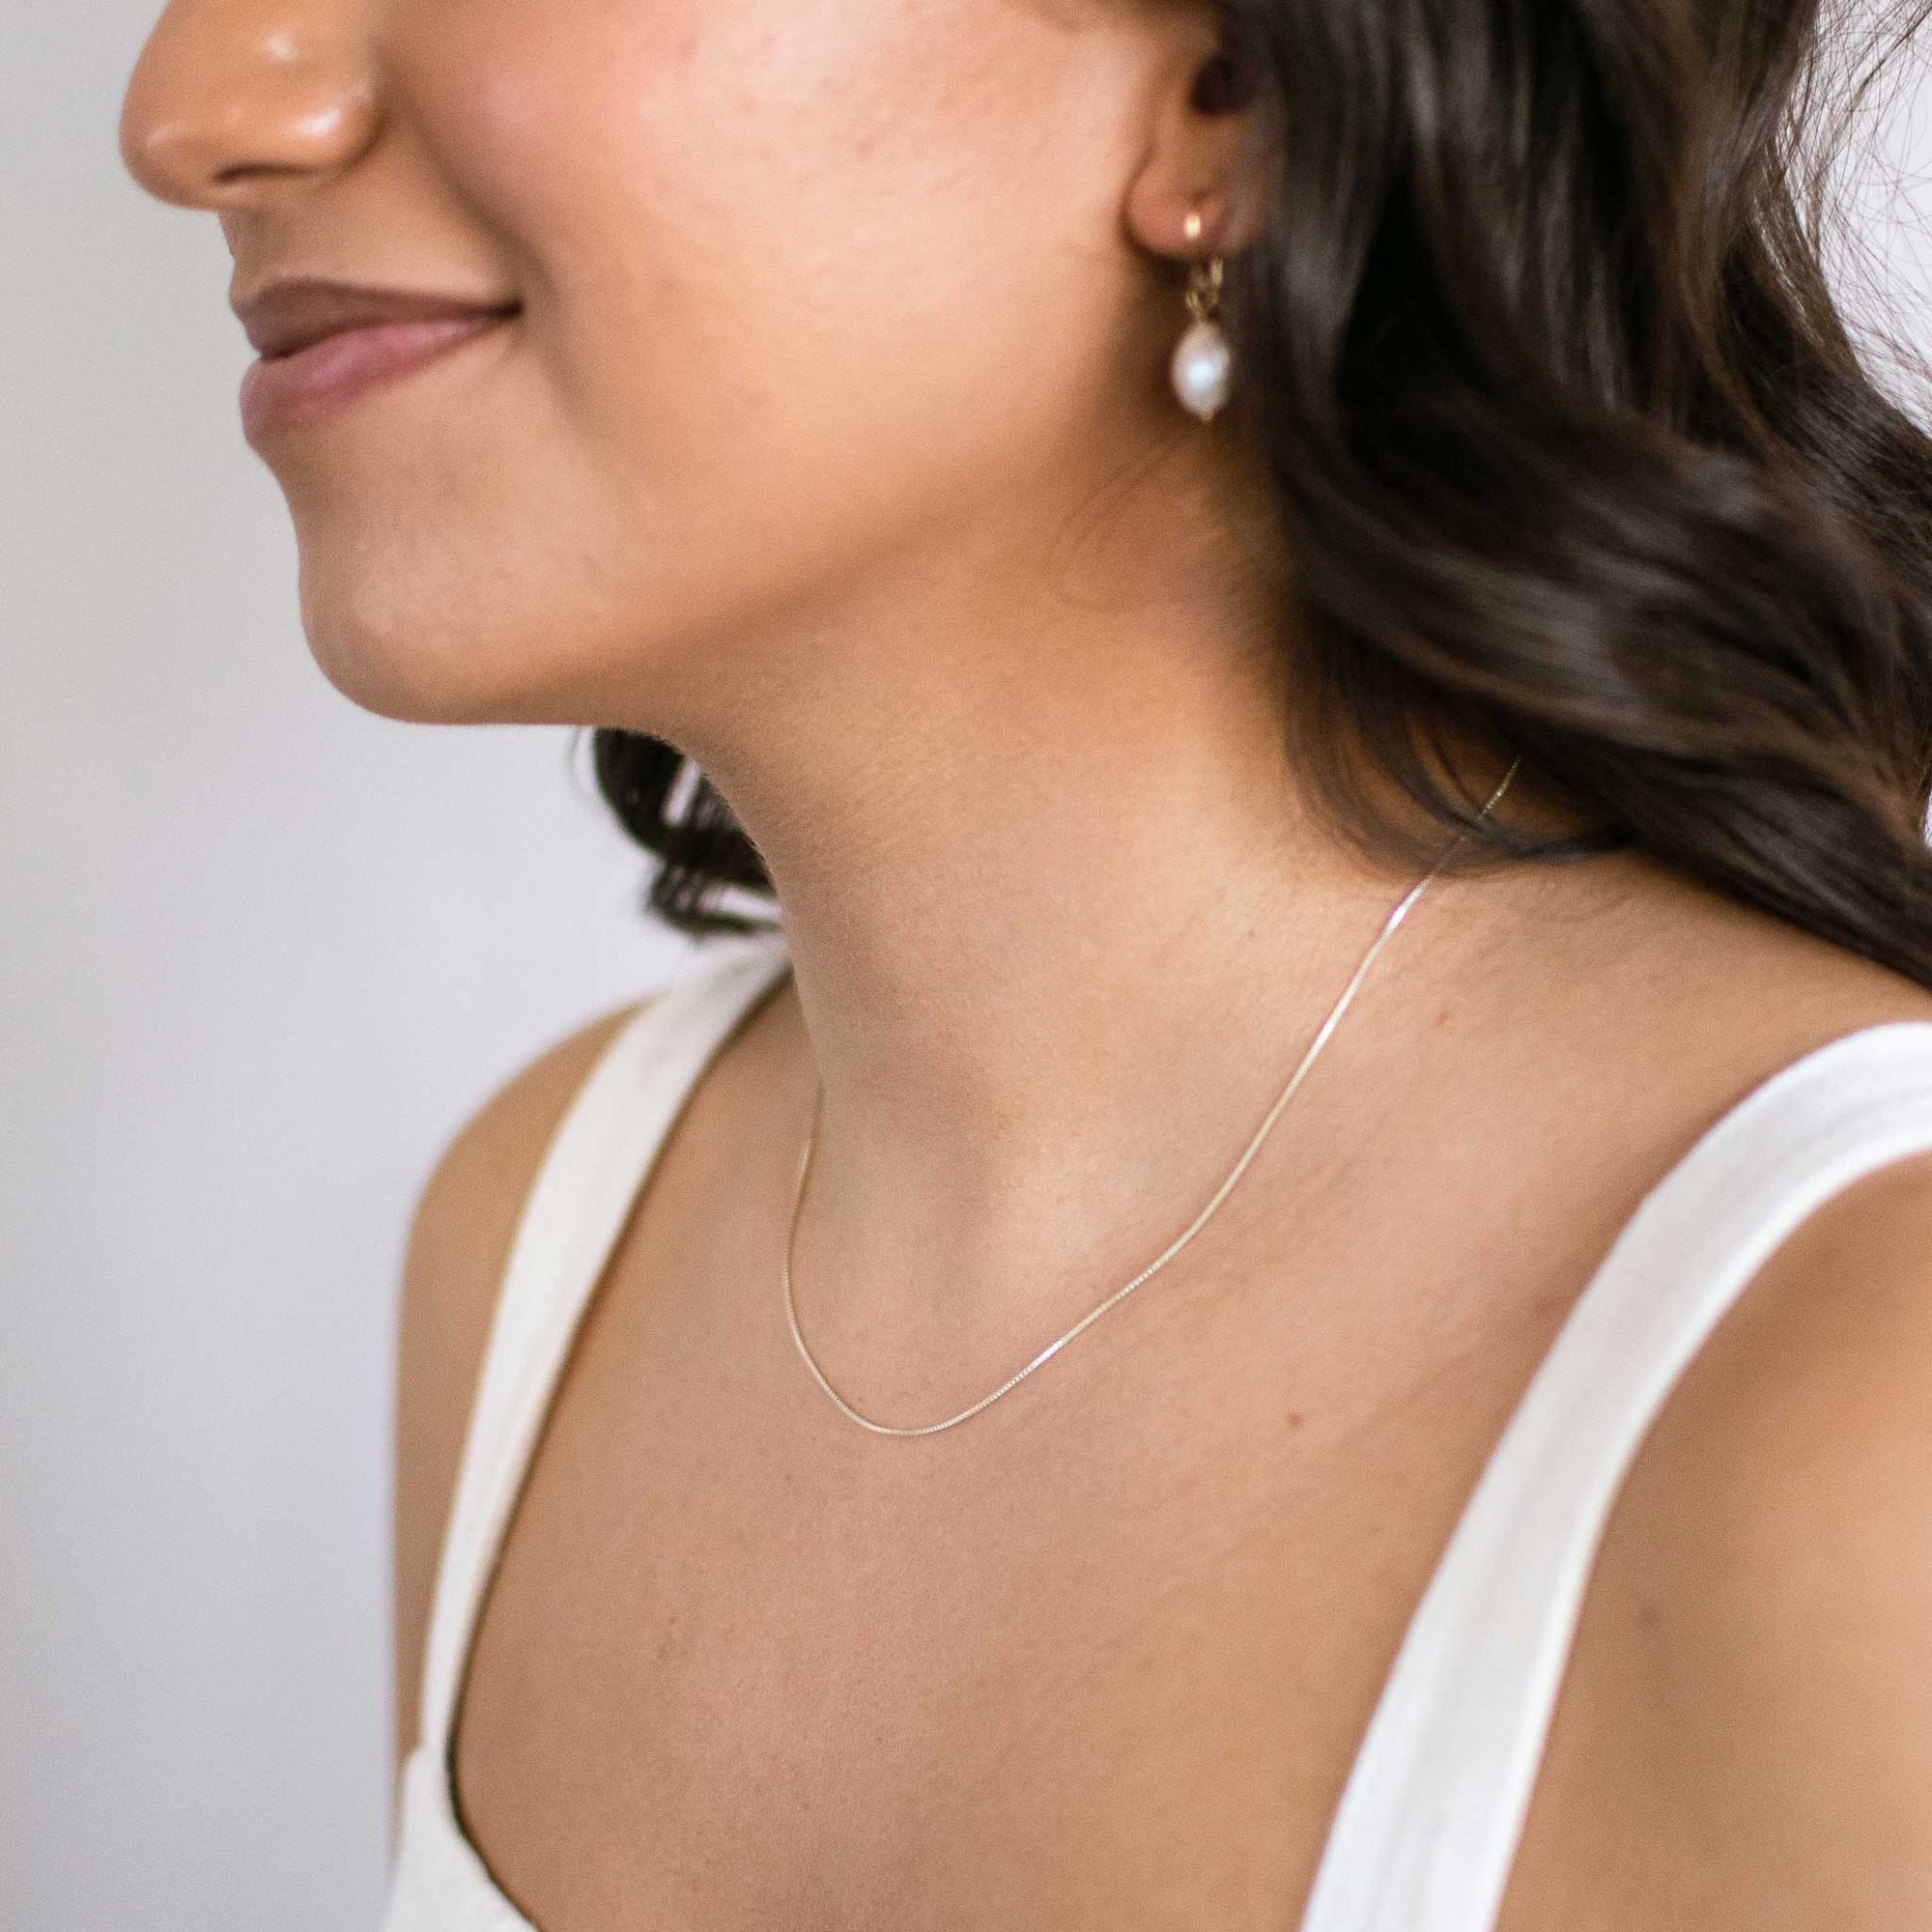 woman wearing a thin, silver box chain necklace from the left view.